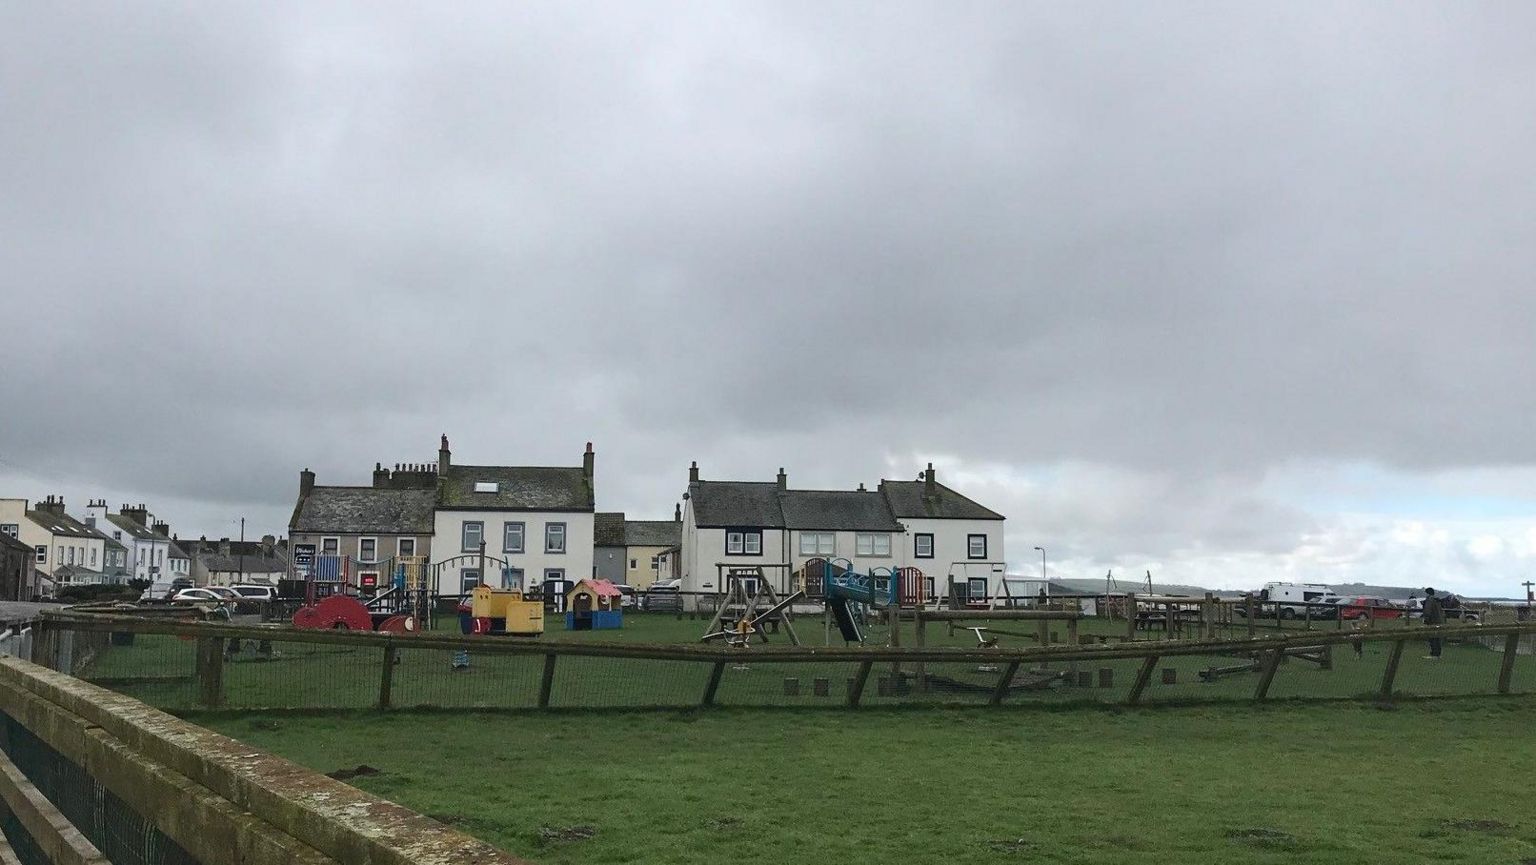 A general view of the play park in Allonby